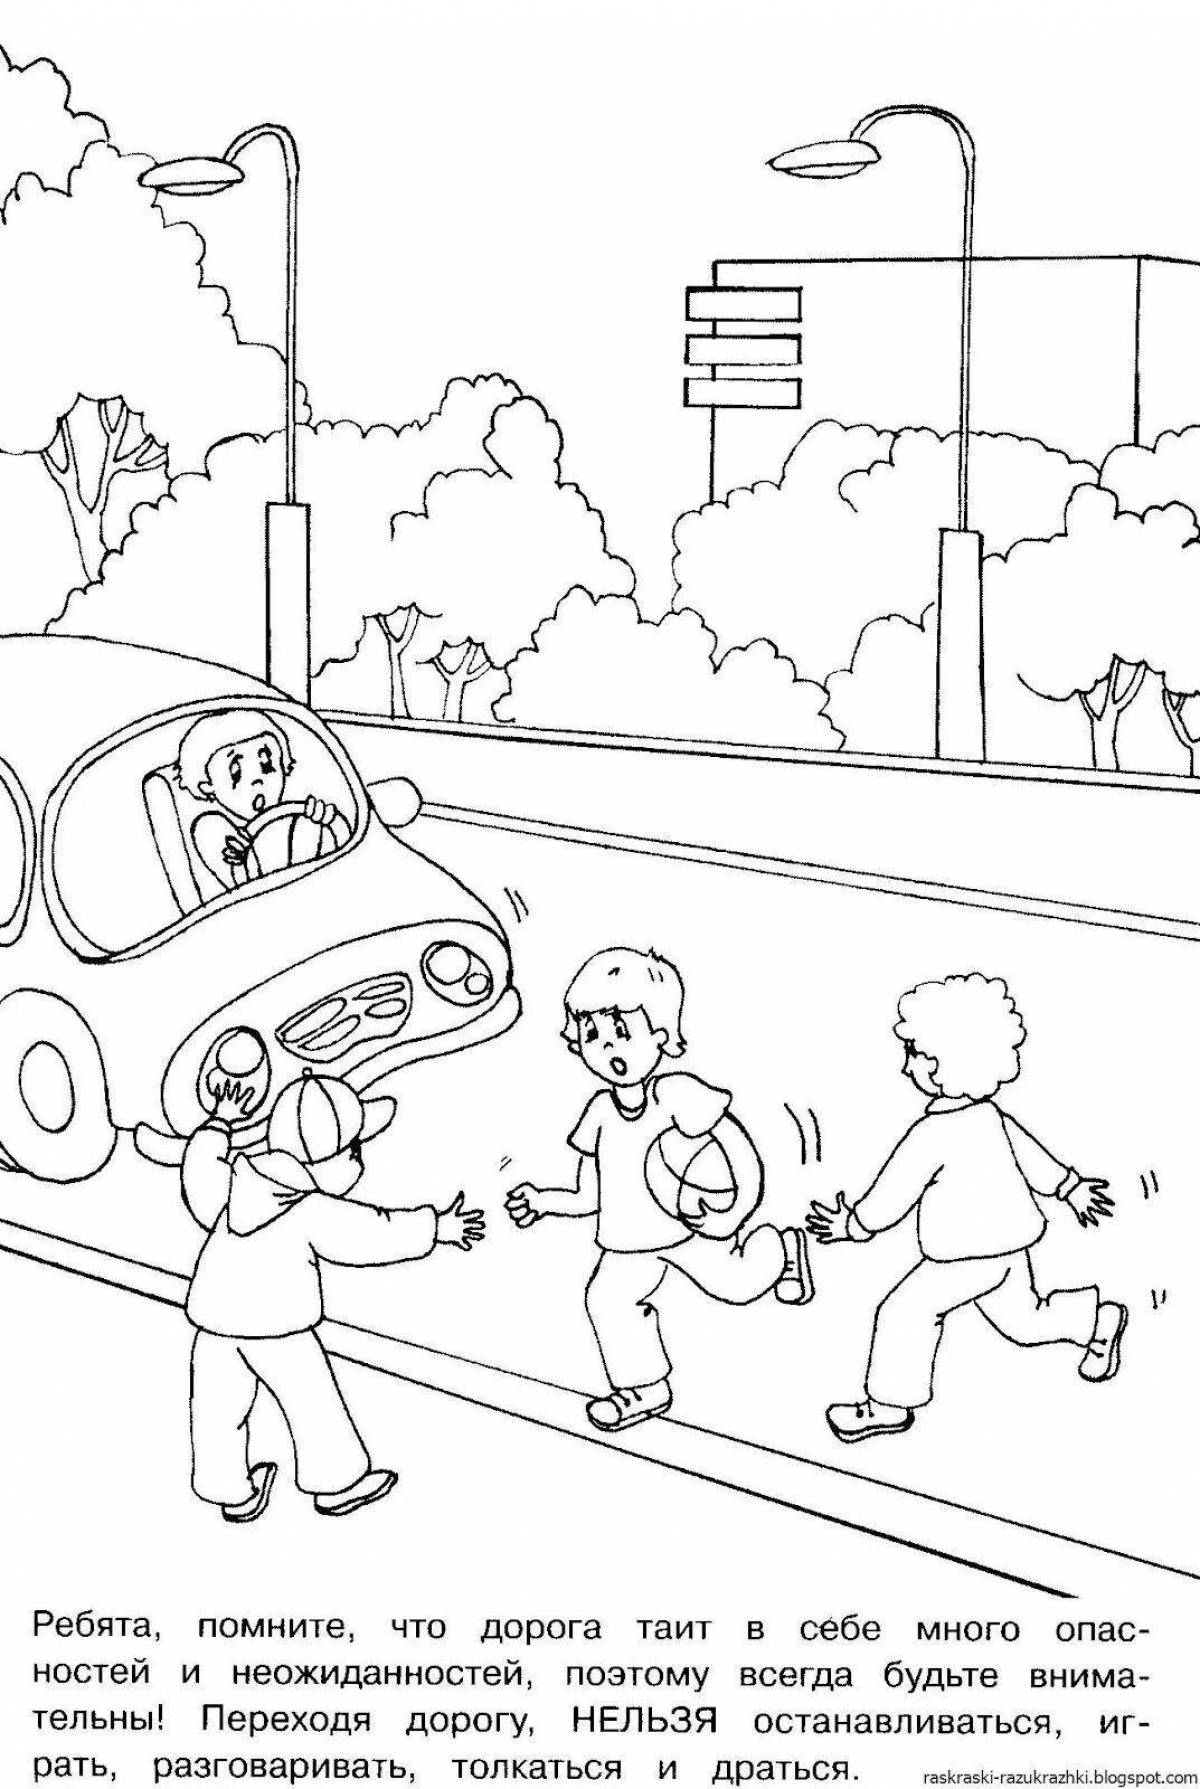 Amazing road safety page for kids